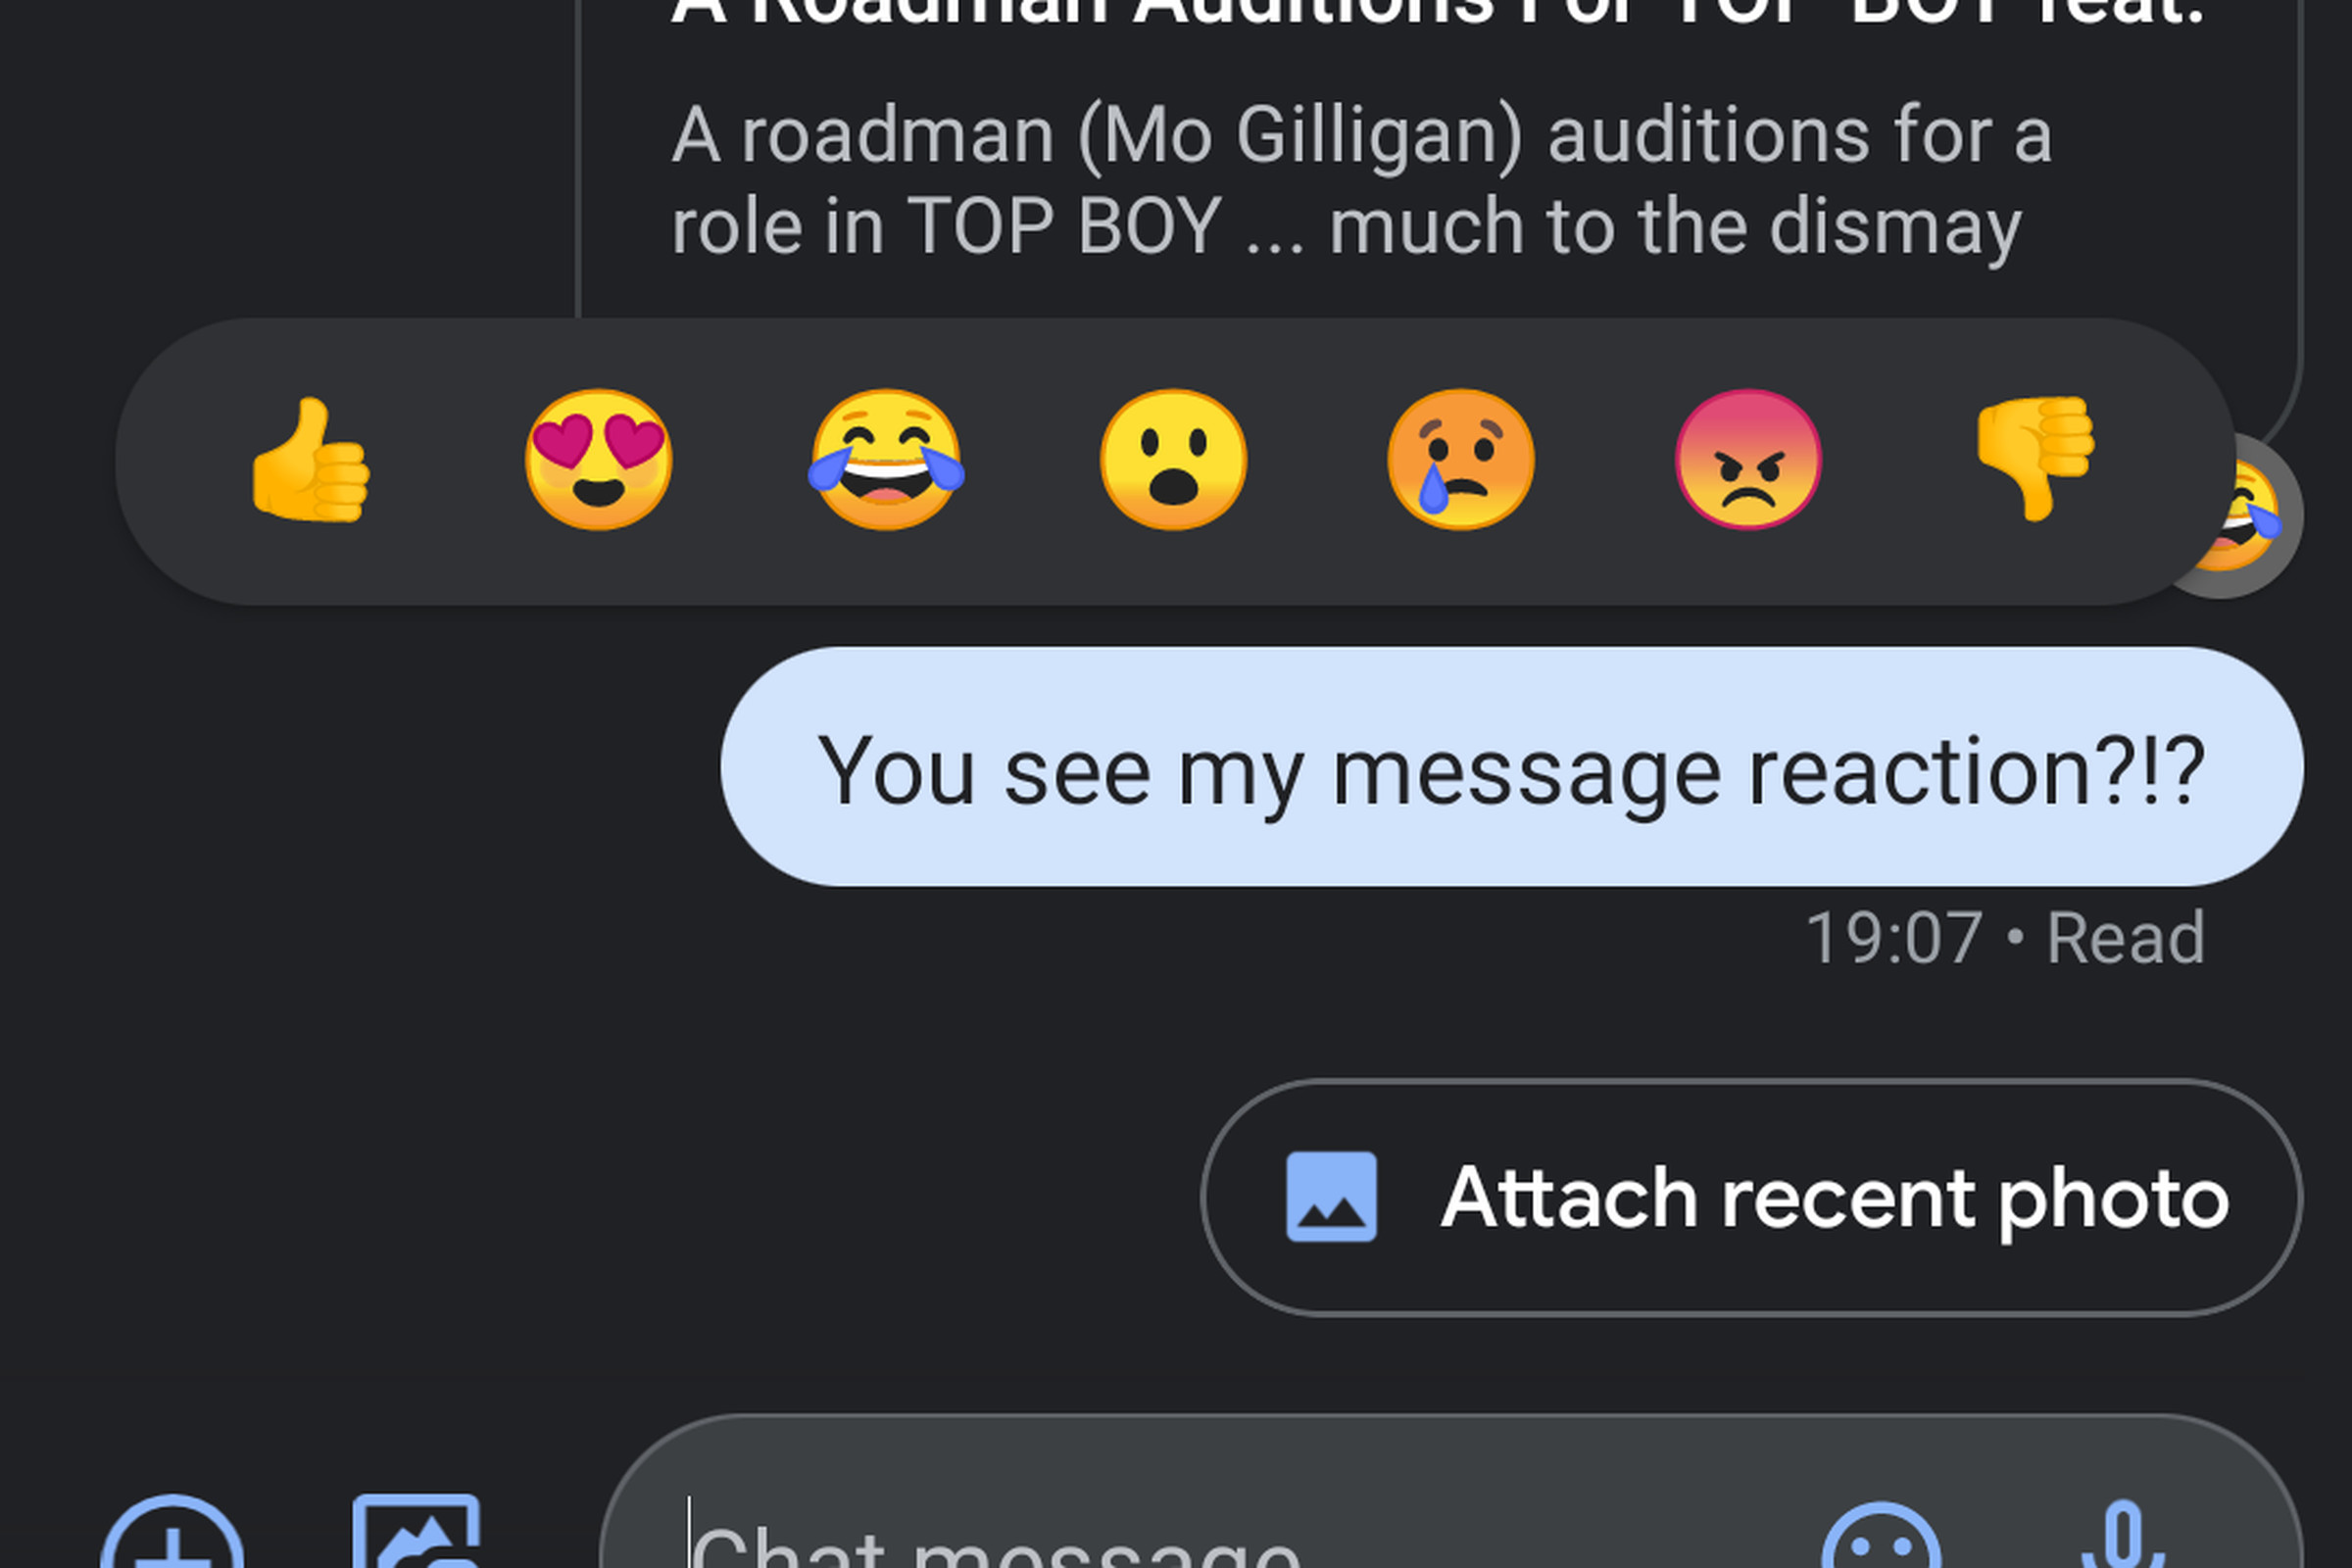 Users in the test can react to messages by long-pressing on them.